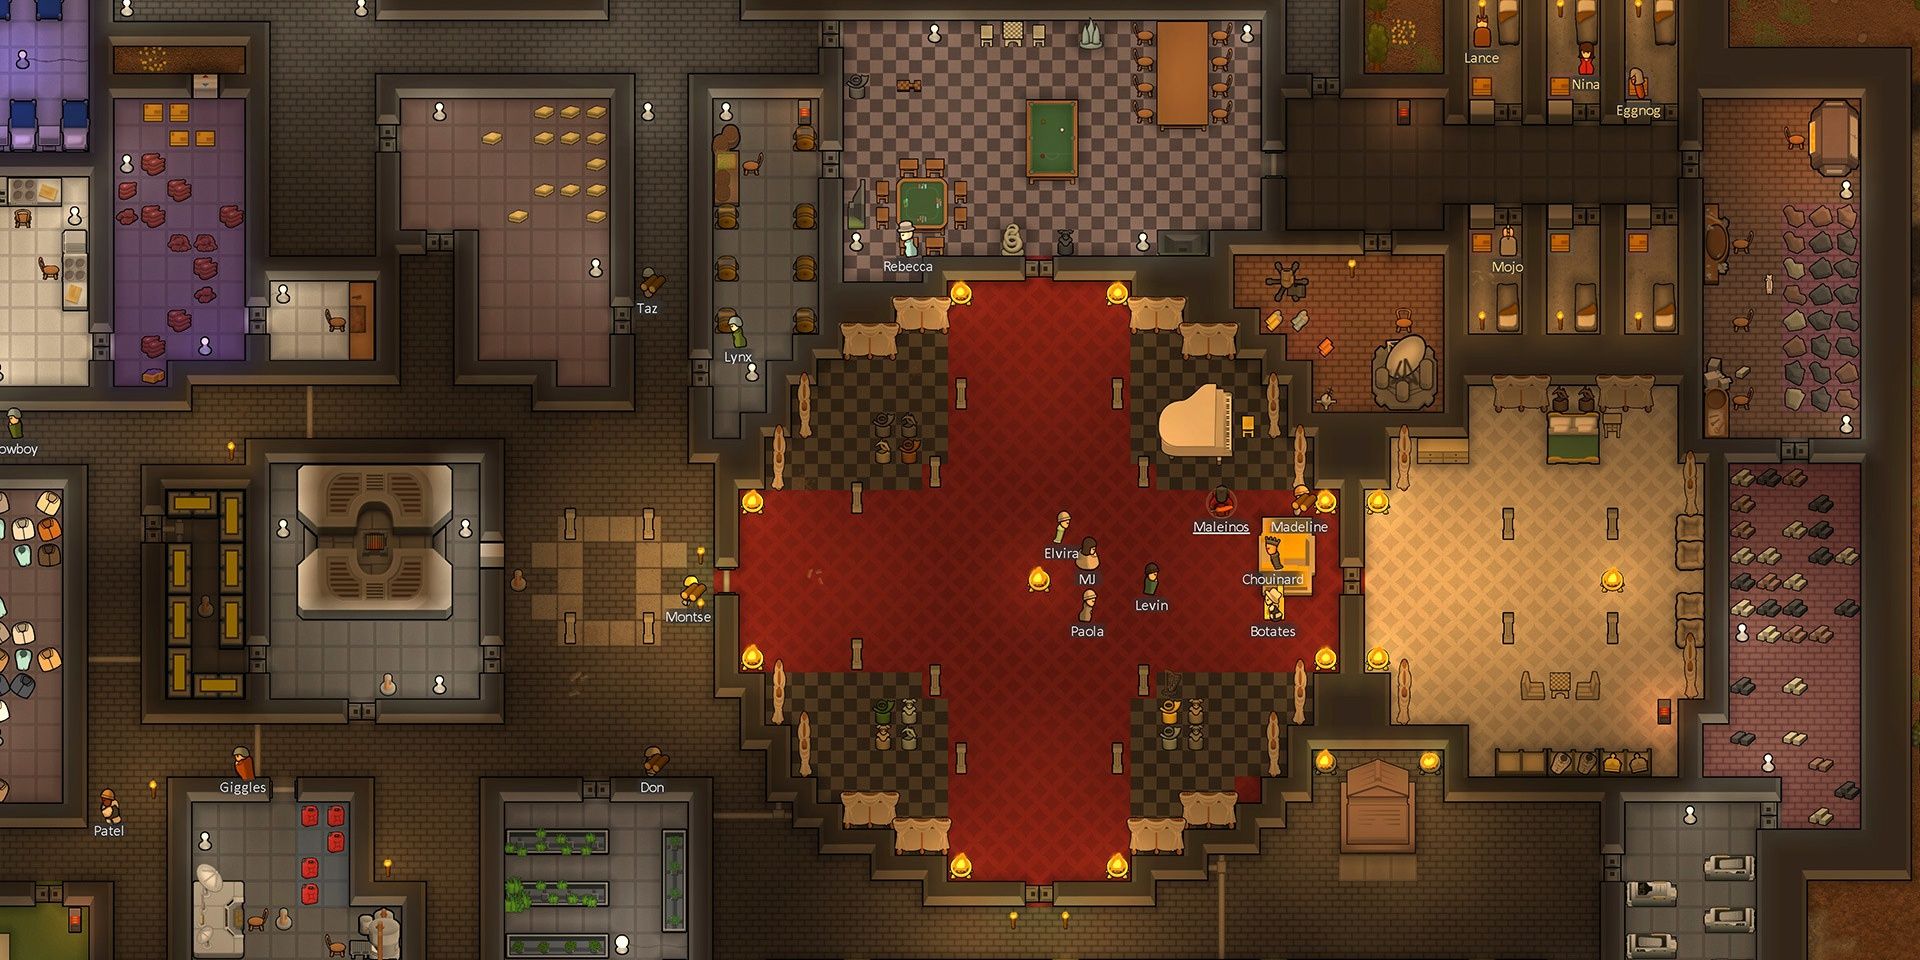 The Royalty edition of Rimworld